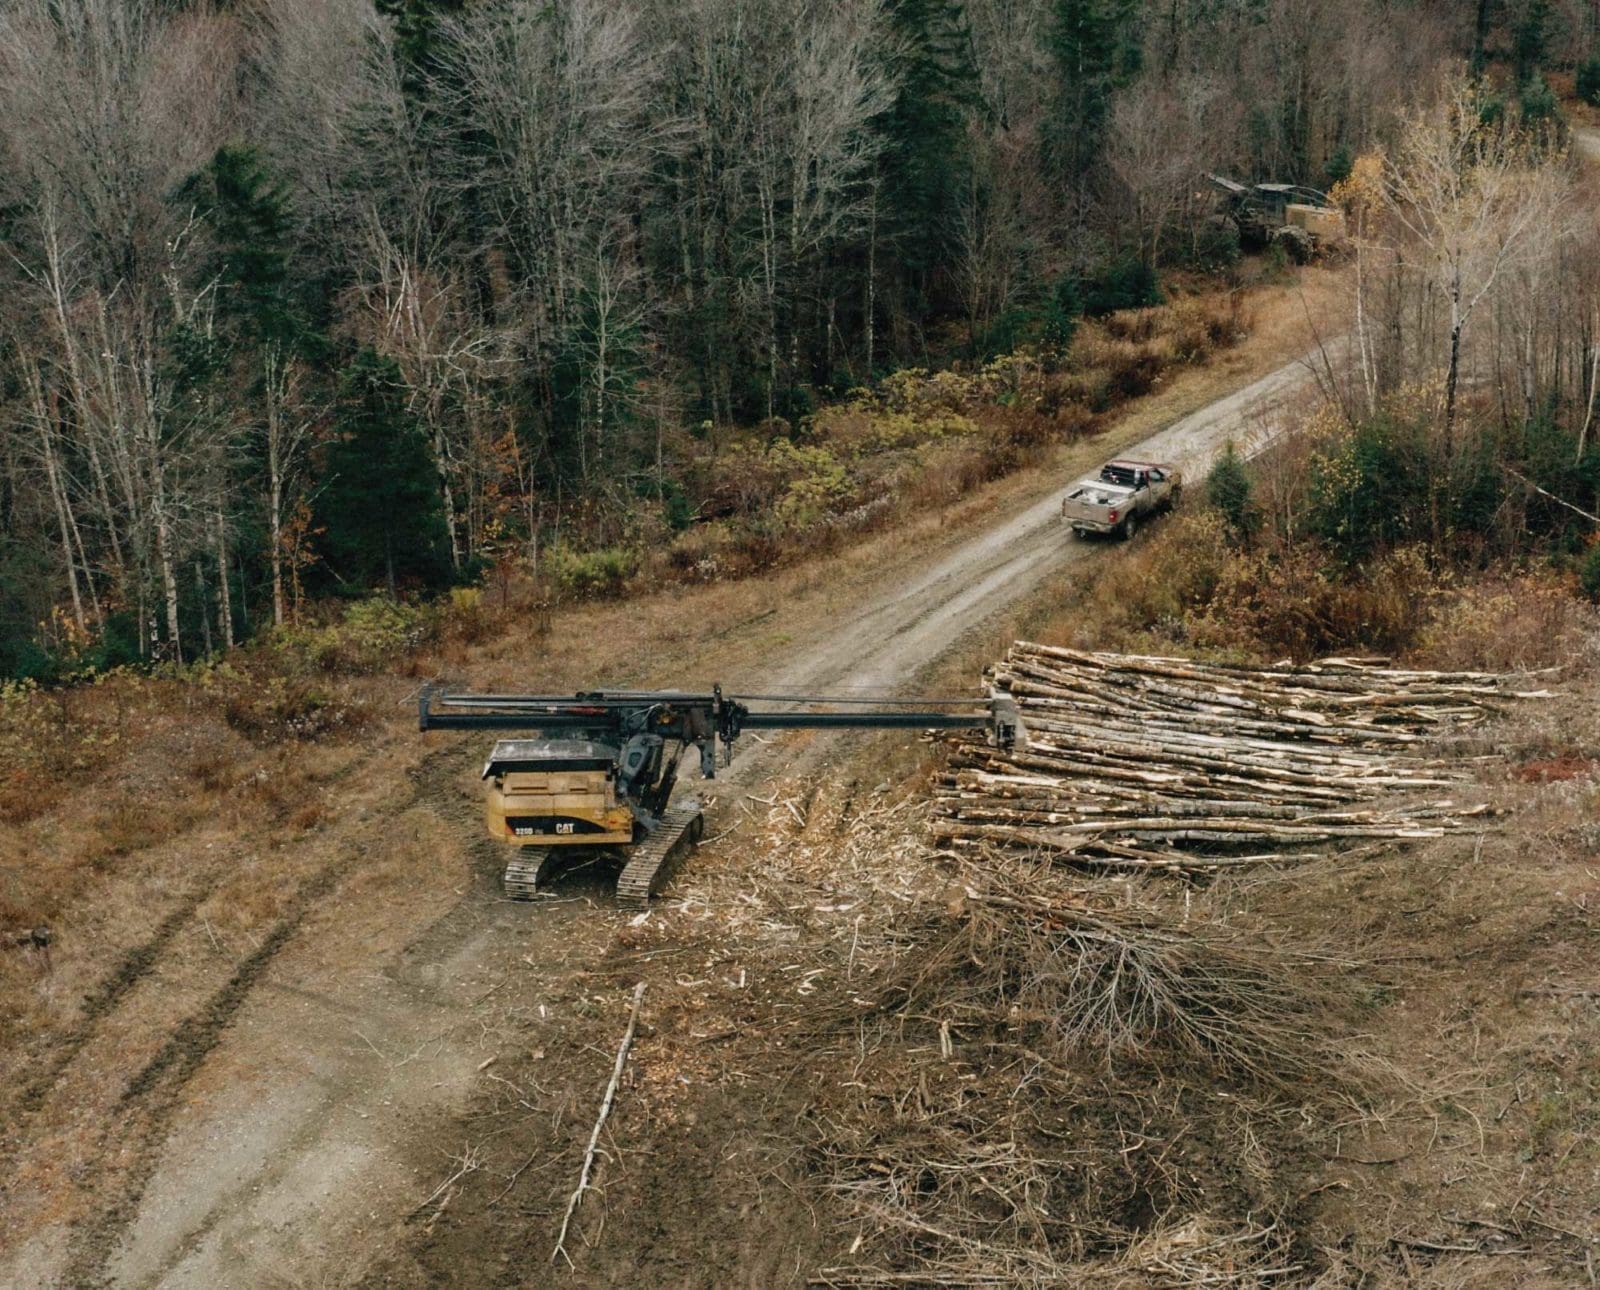 Logging machinery stacks cut timber in a private rural forest.